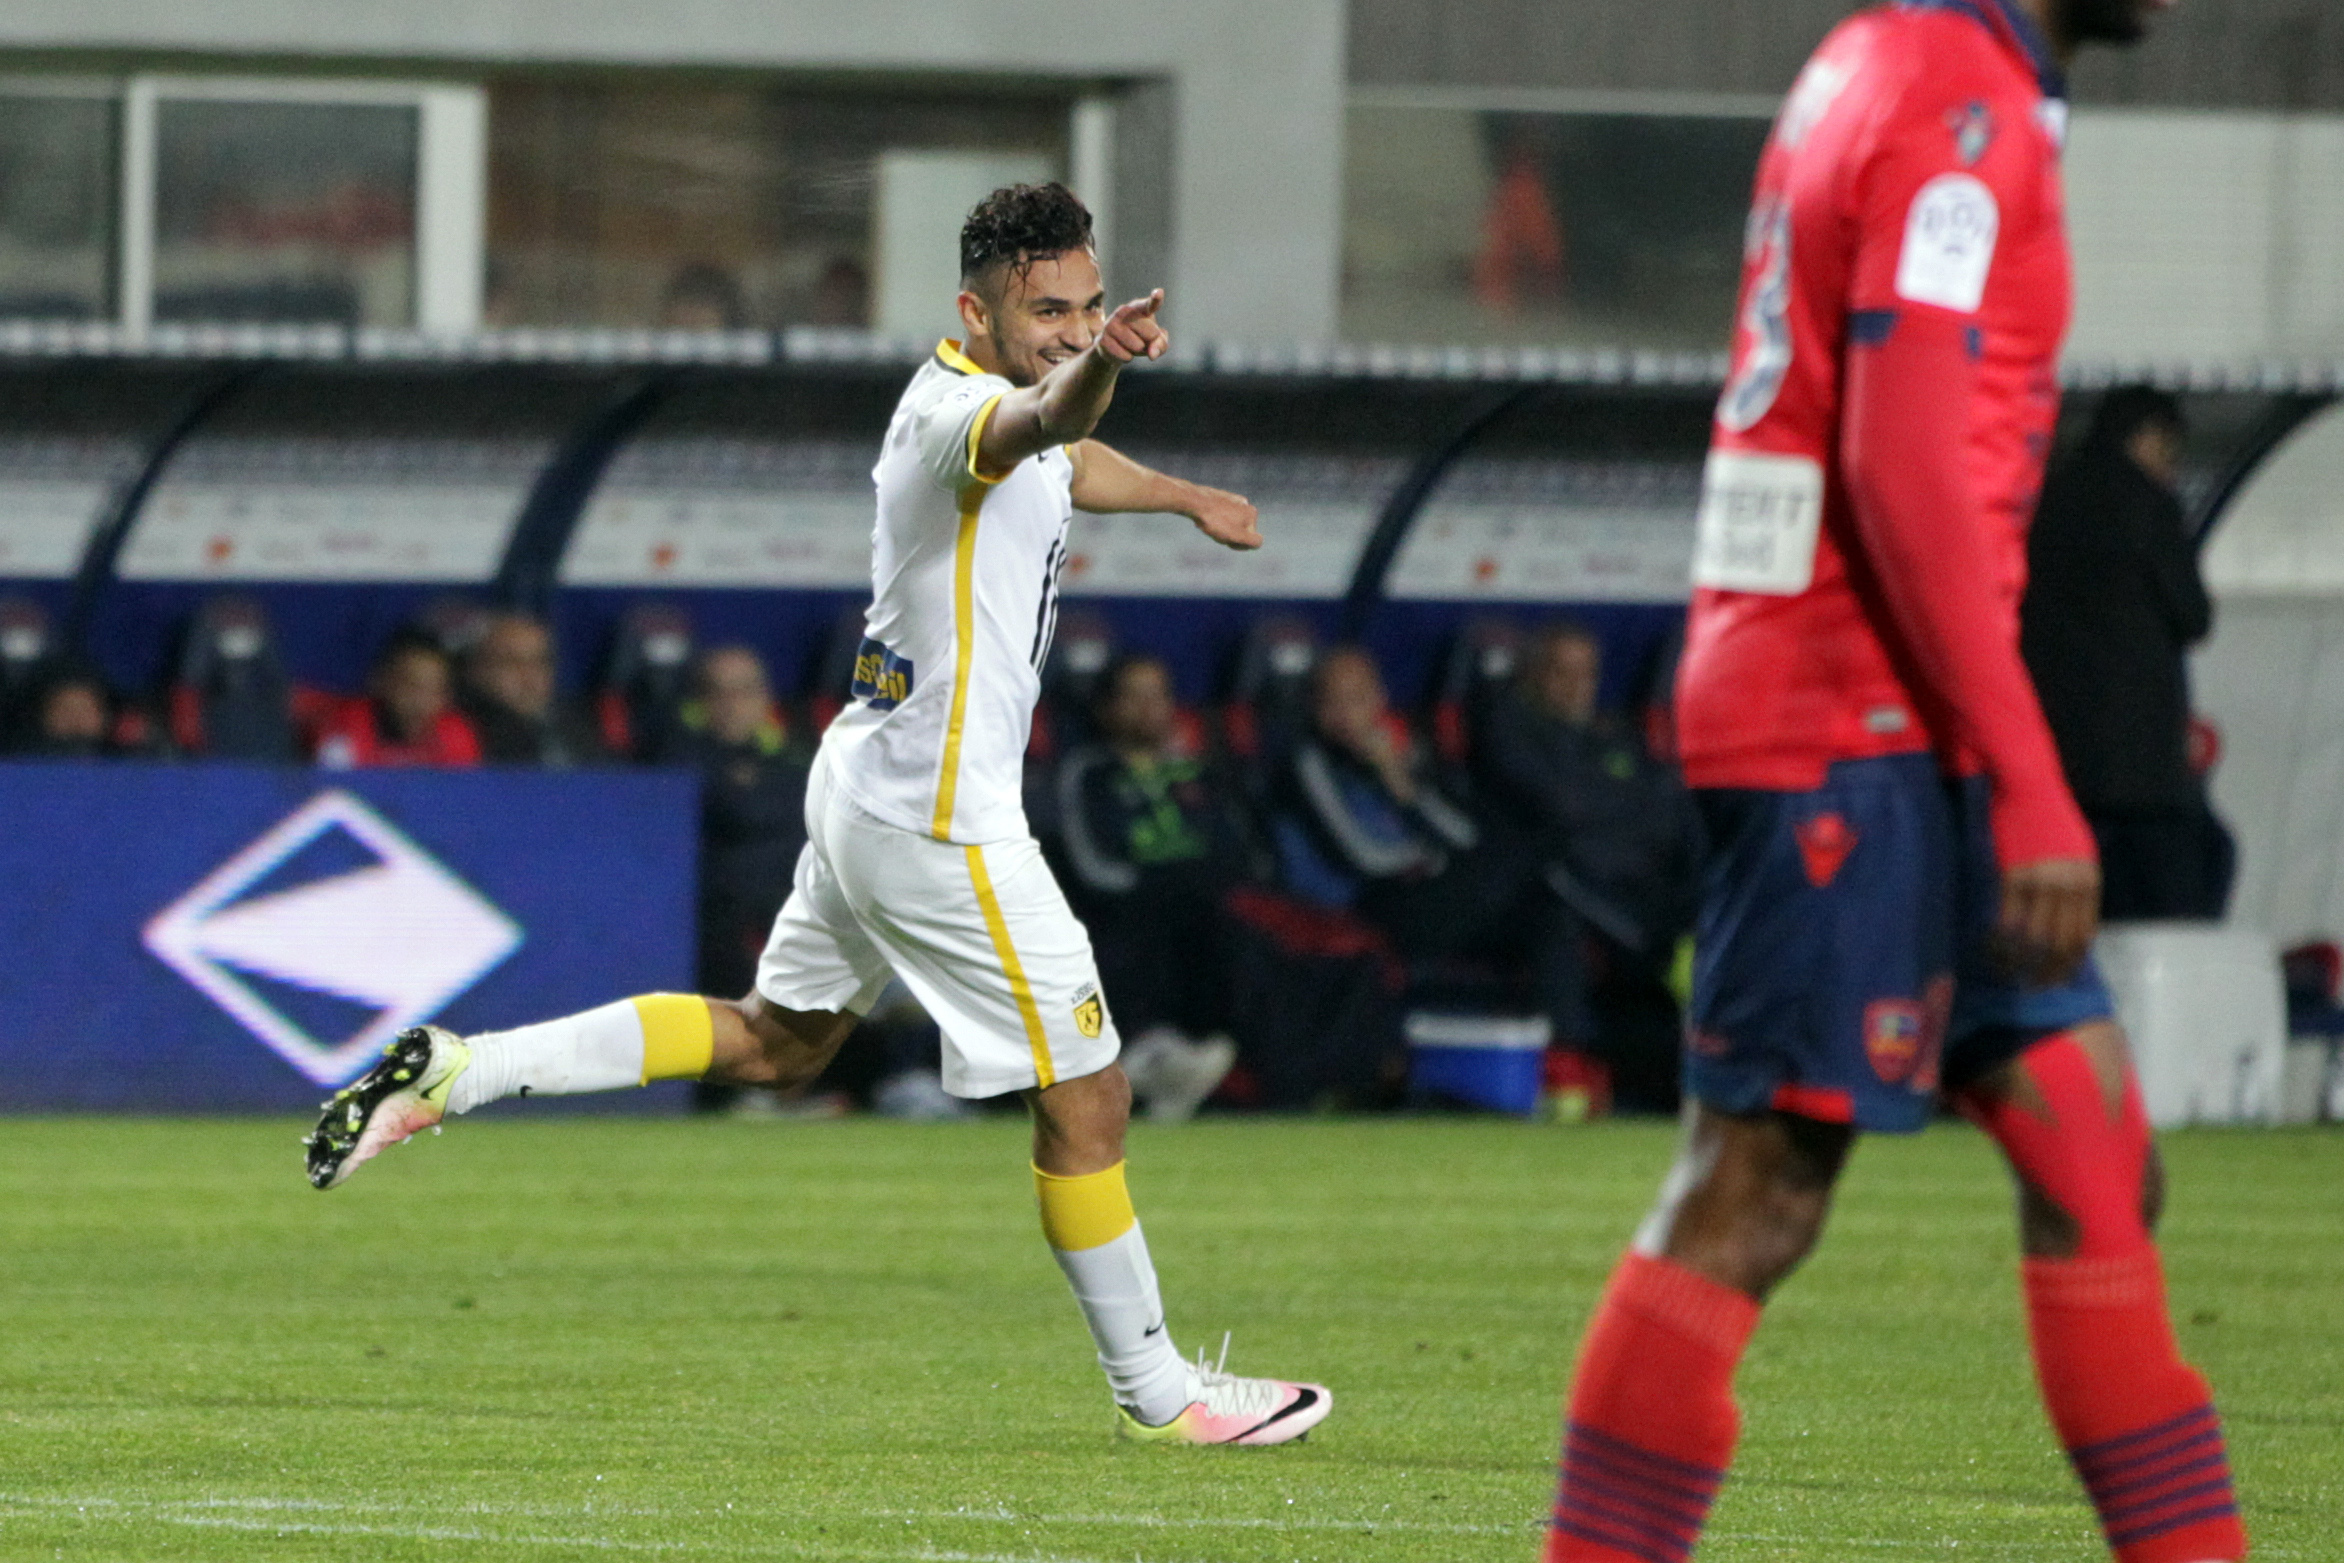 Lille's French midfielder Sofiane Boufal (C) celebrates after scoring a goal during the French L1 football match Gazelec Ajaccio (GFCA) against Lille (LOSC) on April 16, 2016, at the Ange Casanova stadium in Ajaccio, on the French Mediterranean island of Corsica. AFP PHOTO / PASCAL POCHARD-CASABIANCA / AFP / PASCAL POCHARD-CASABIANCA        (Photo credit should read PASCAL POCHARD-CASABIANCA/AFP/Getty Images)